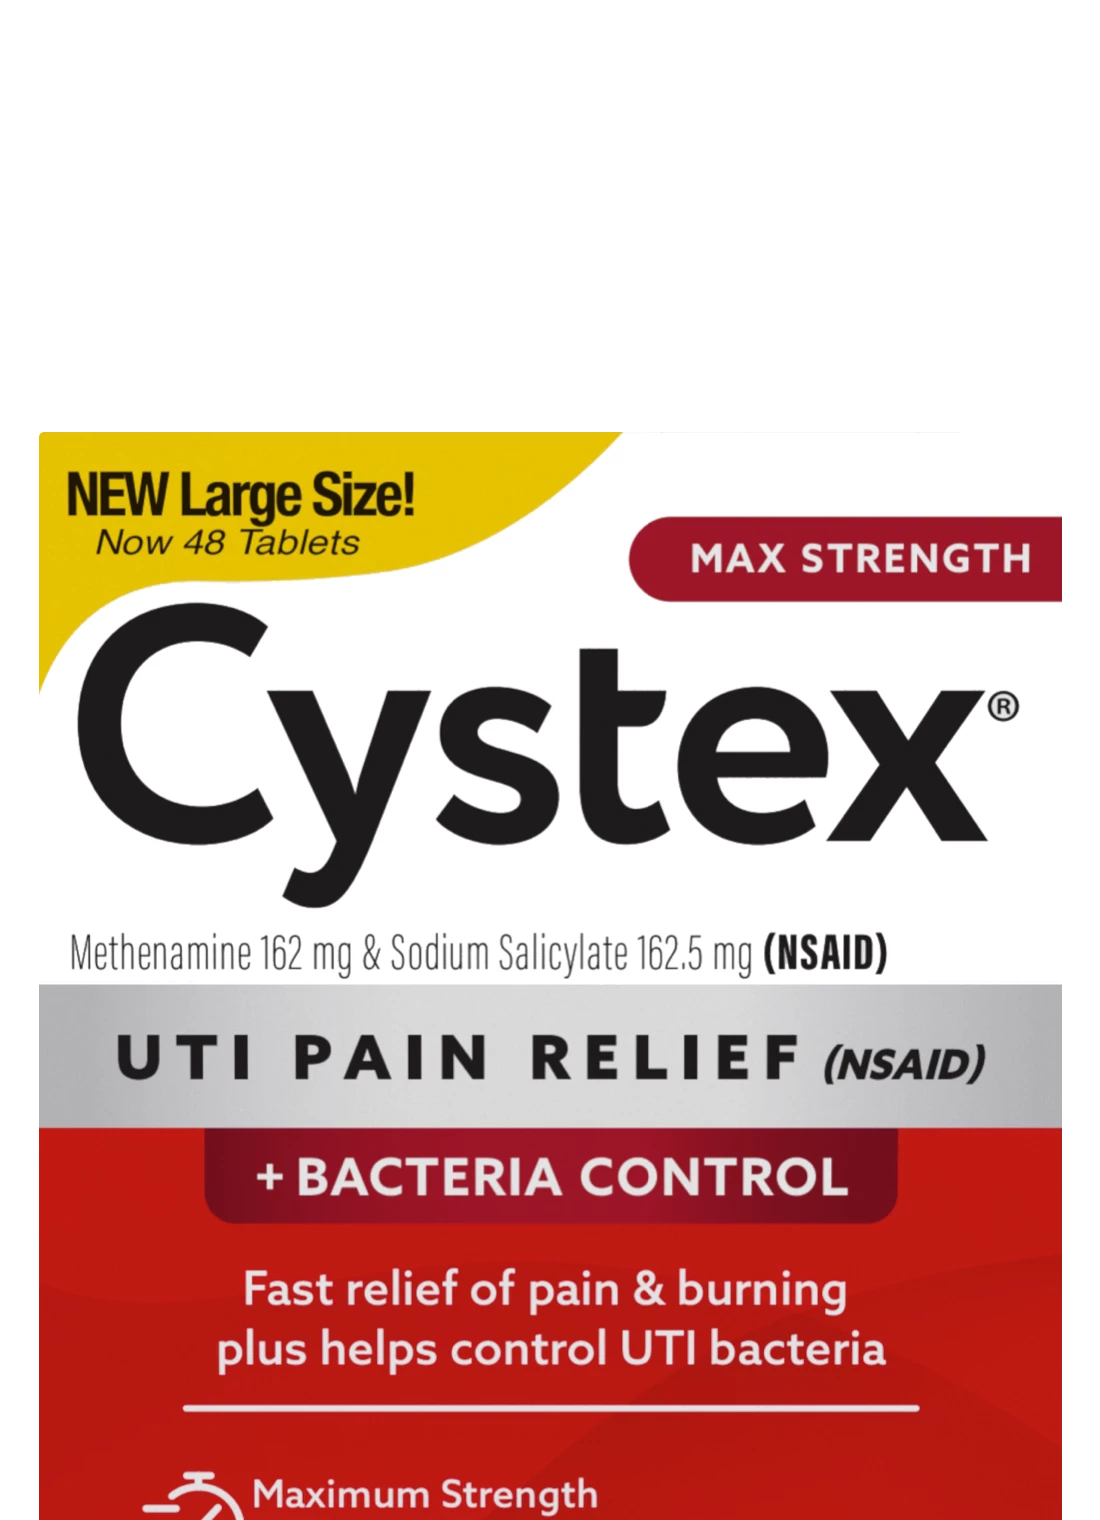 Cystex Max Strength UTI Pain Relief